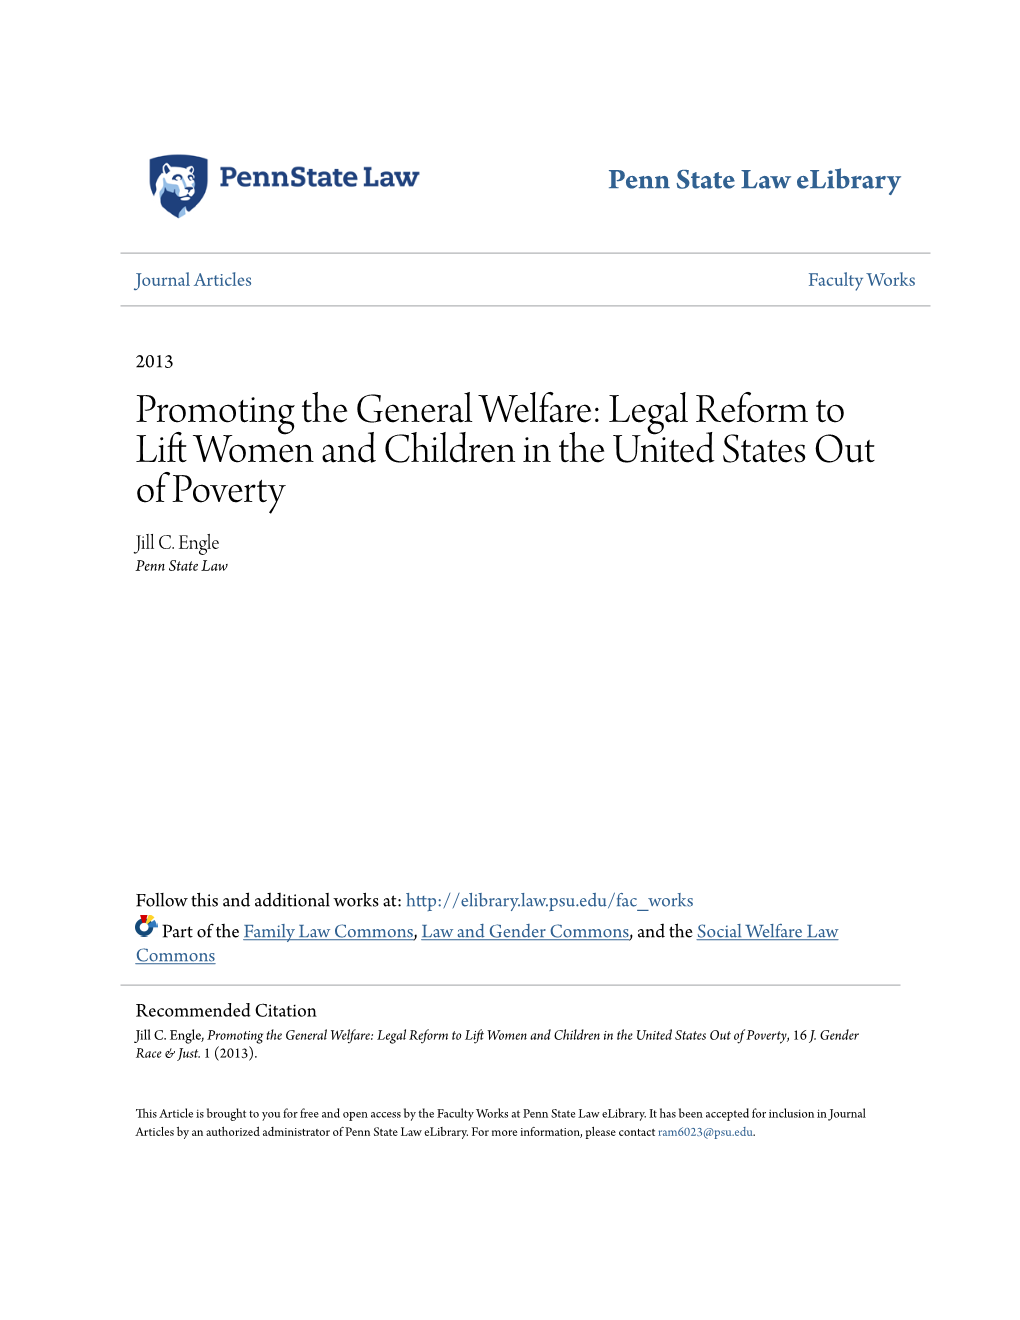 Promoting the General Welfare: Legal Reform to Lift Women and Children in the United States out of Poverty